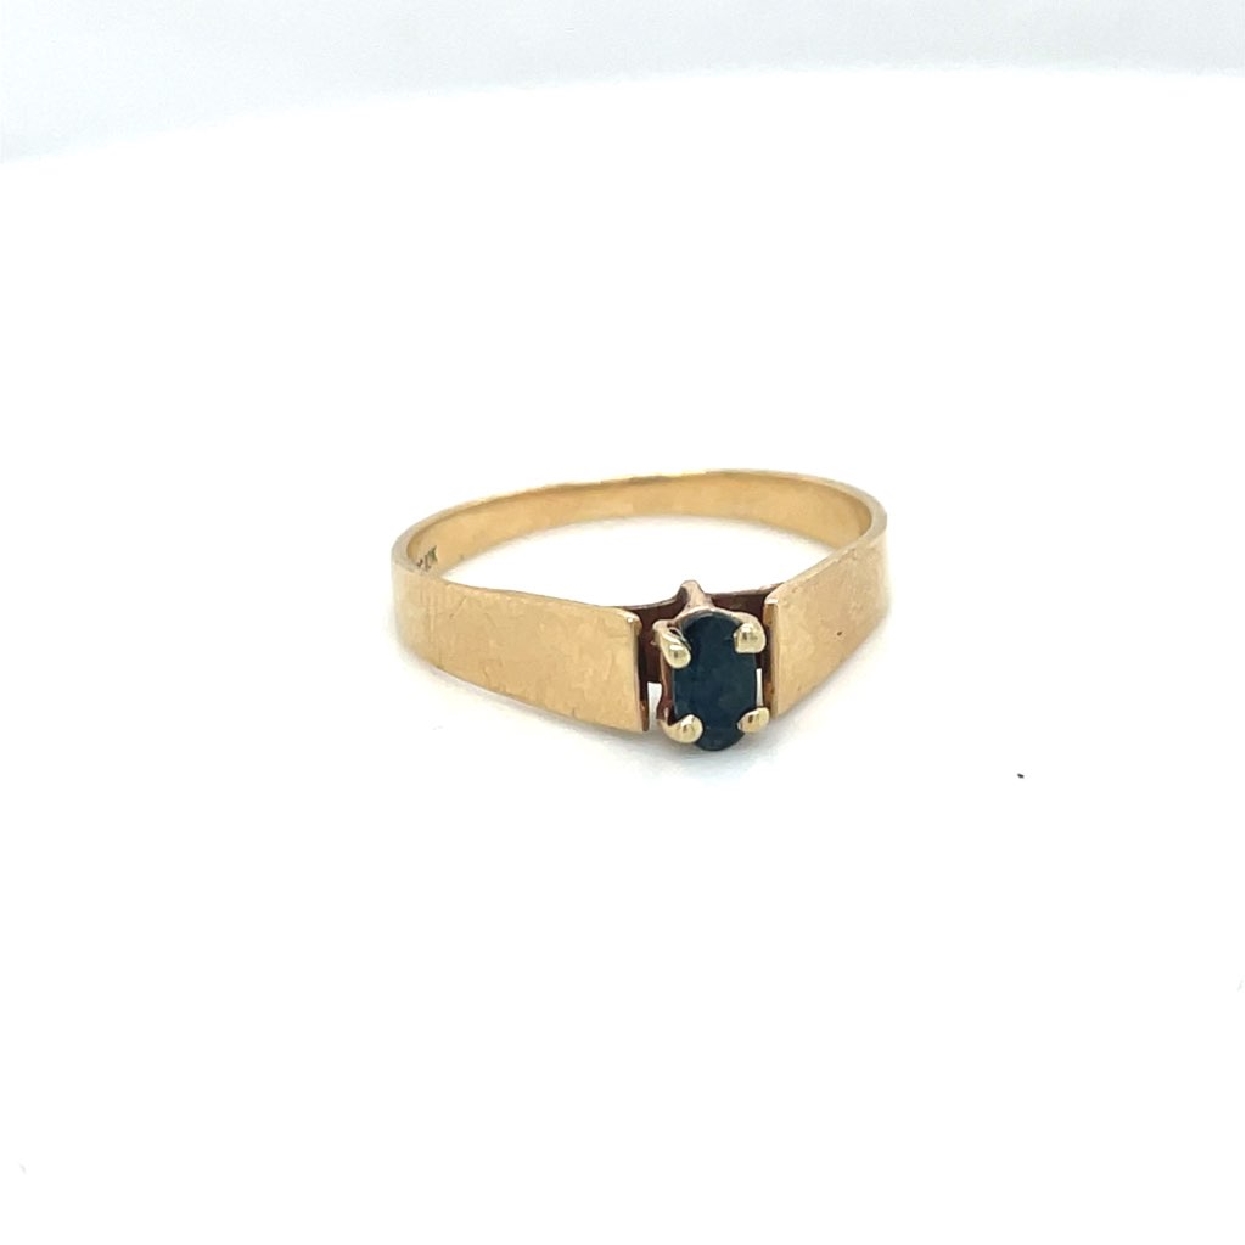 10K Yellow Gold Sapphire Ring

Size: 6.5
